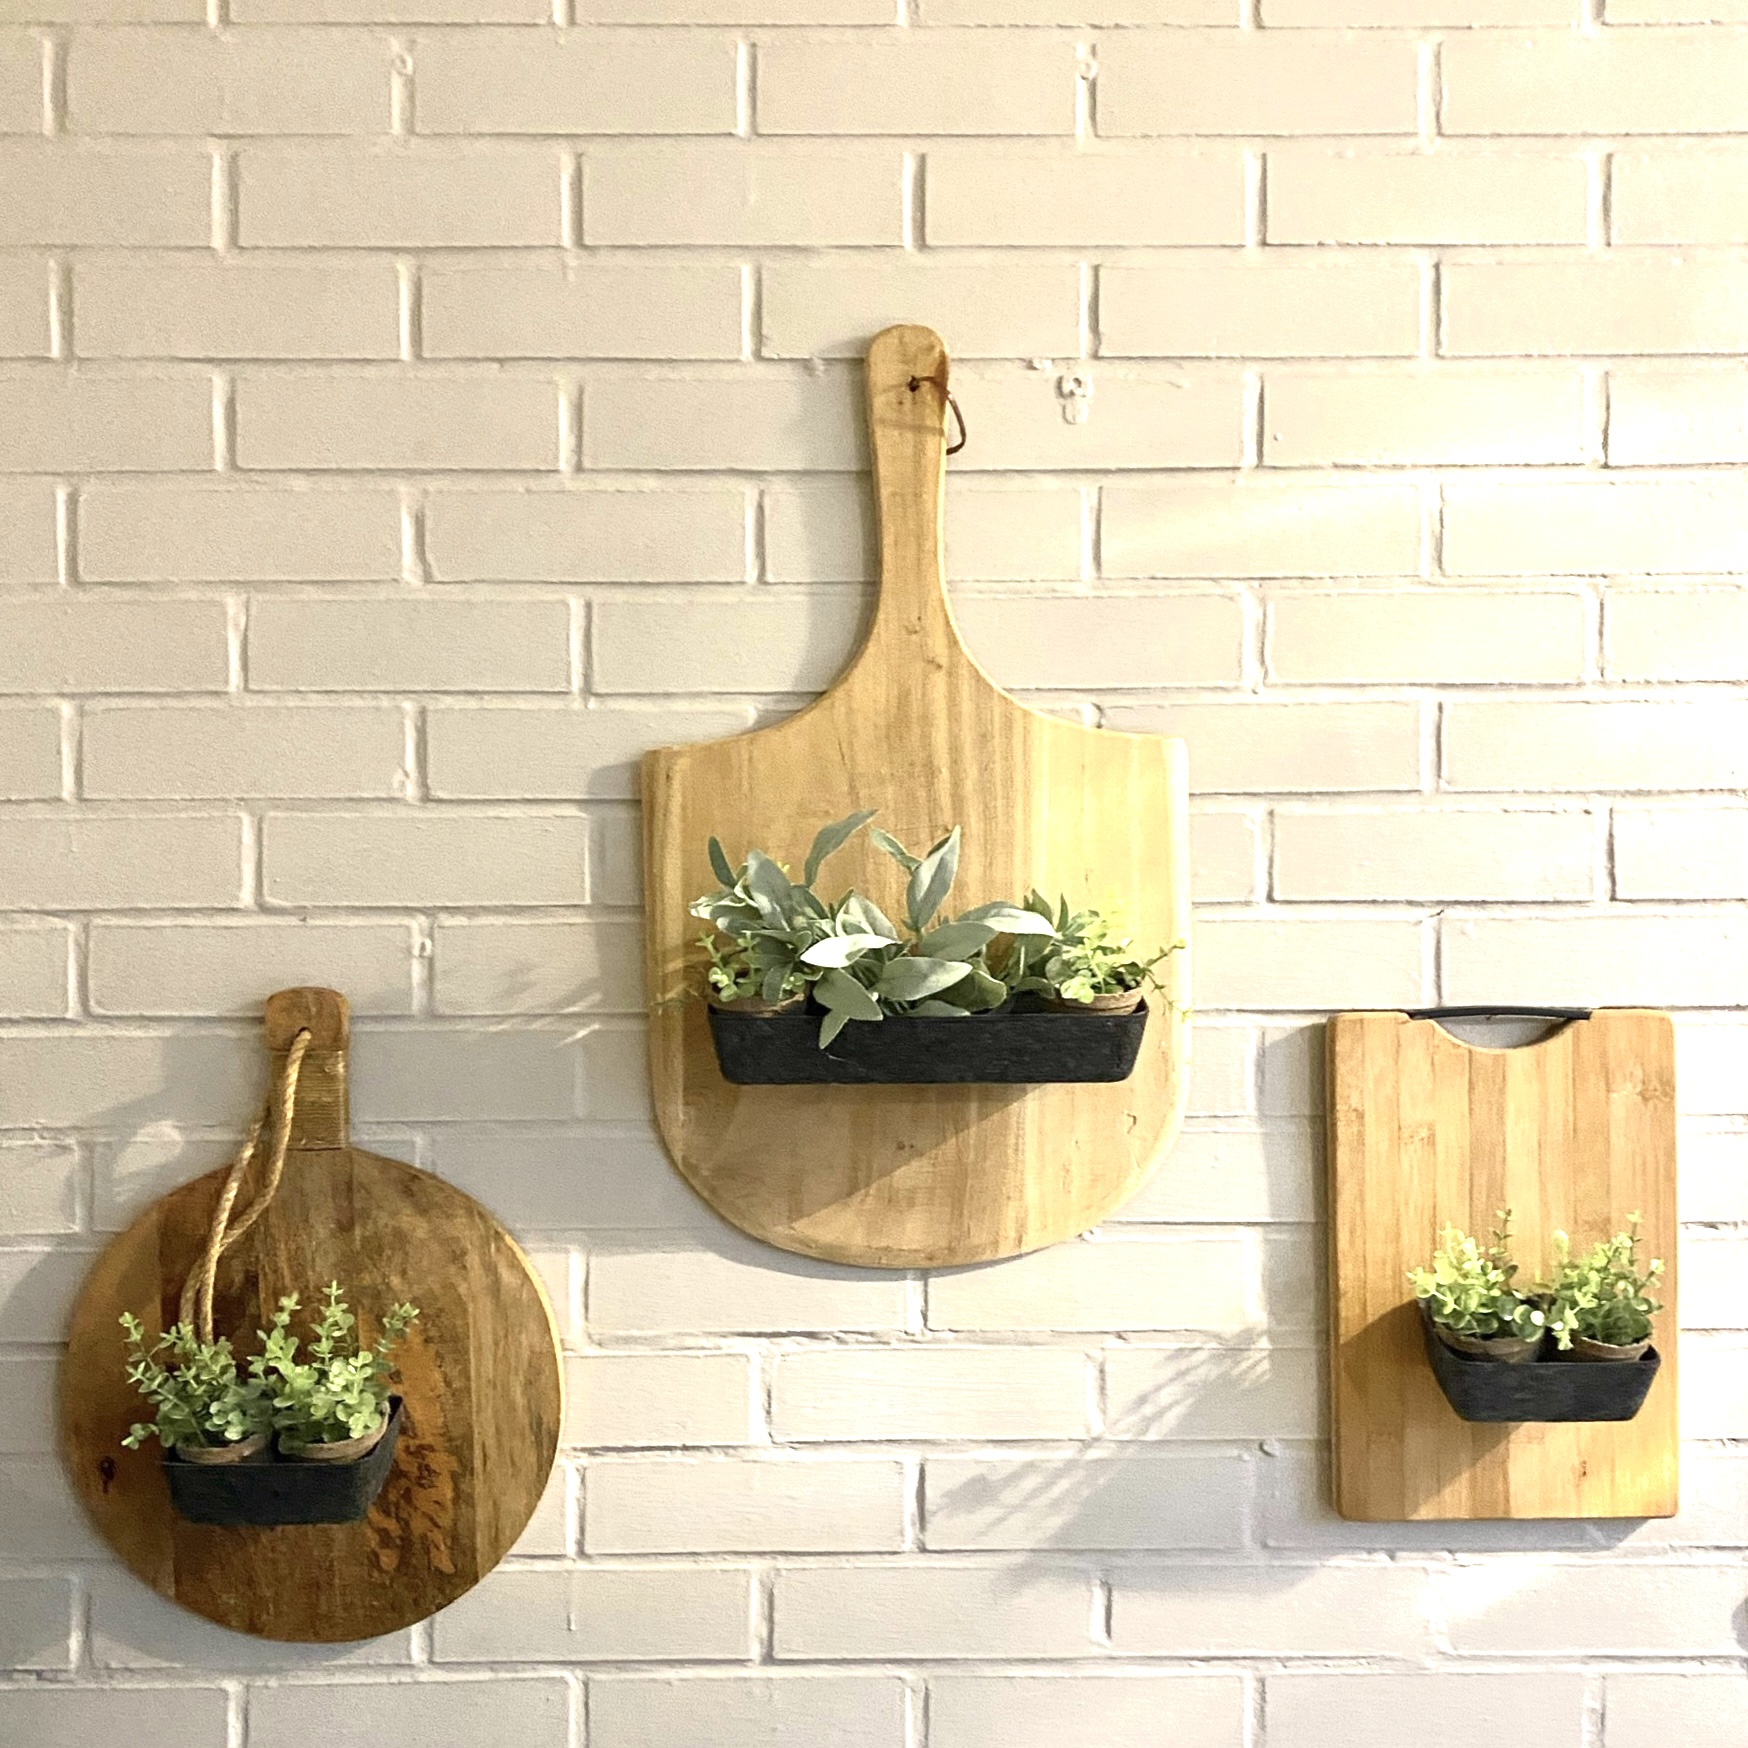 Three wooden cutting boards of different sizes with artificial plants in black pots attached, hanging on a white brick wall.